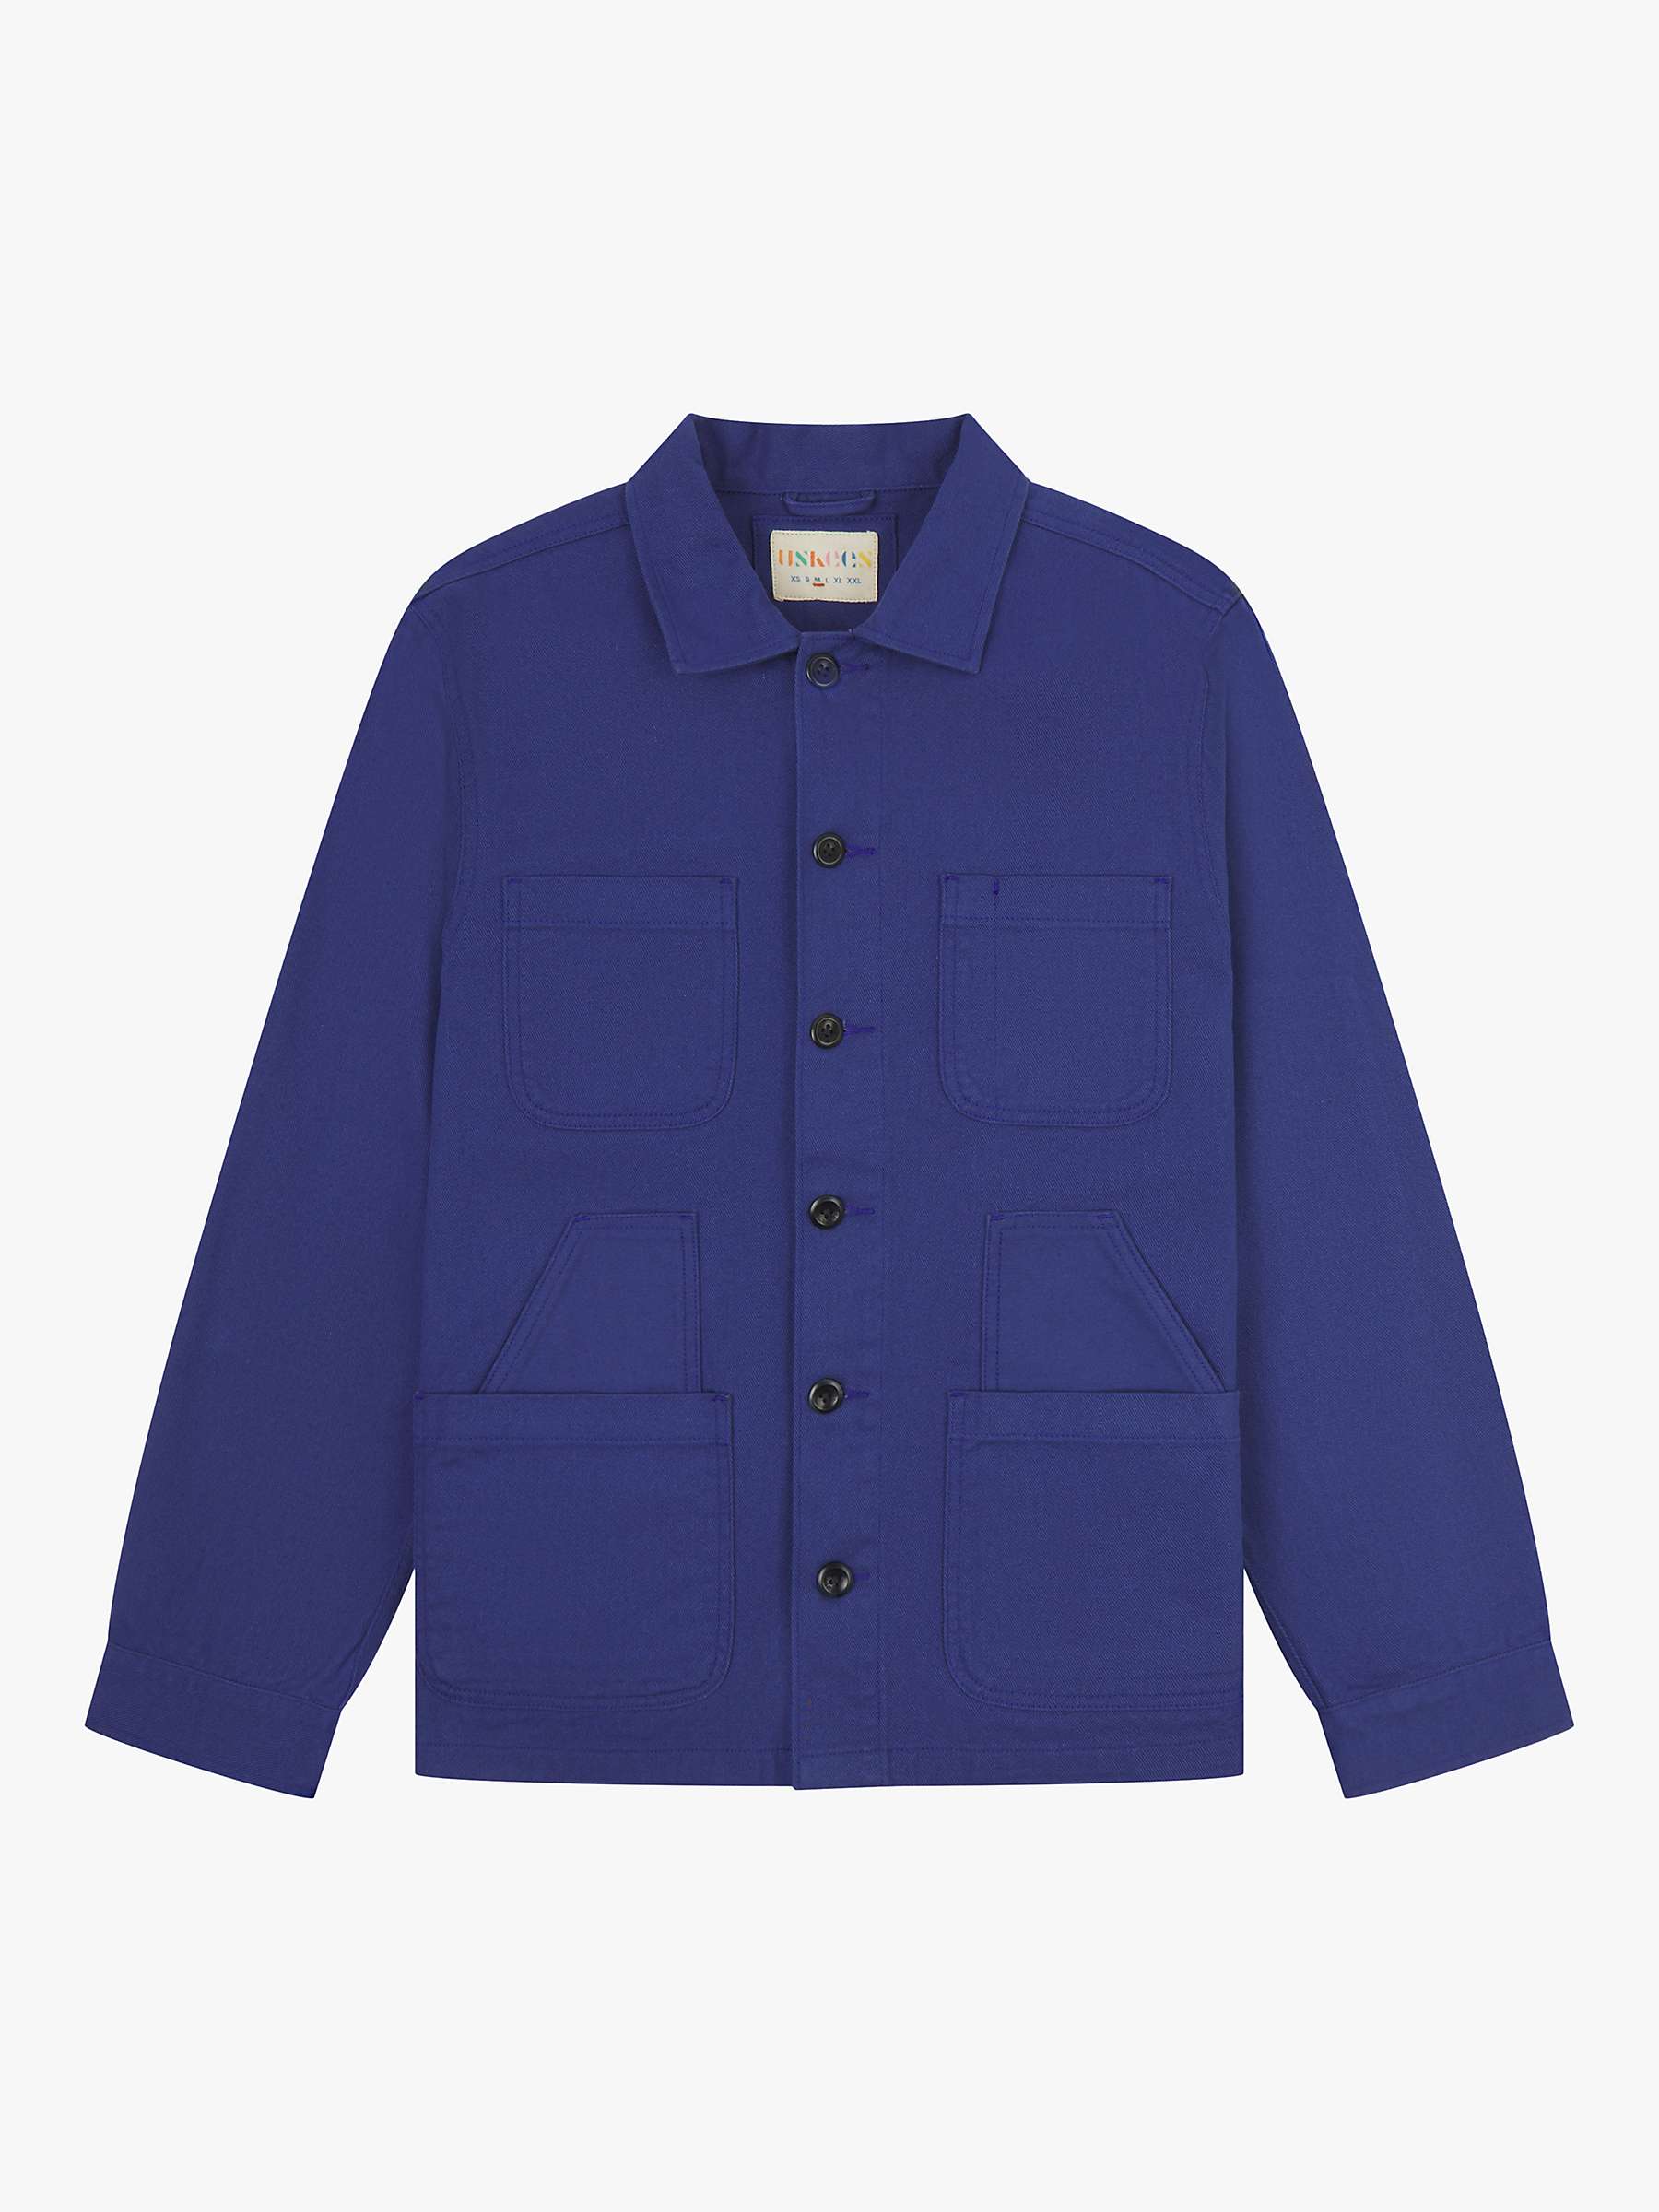 Buy Uskees Drill Organic Cotton Overshirt, Ultra Blue Online at johnlewis.com